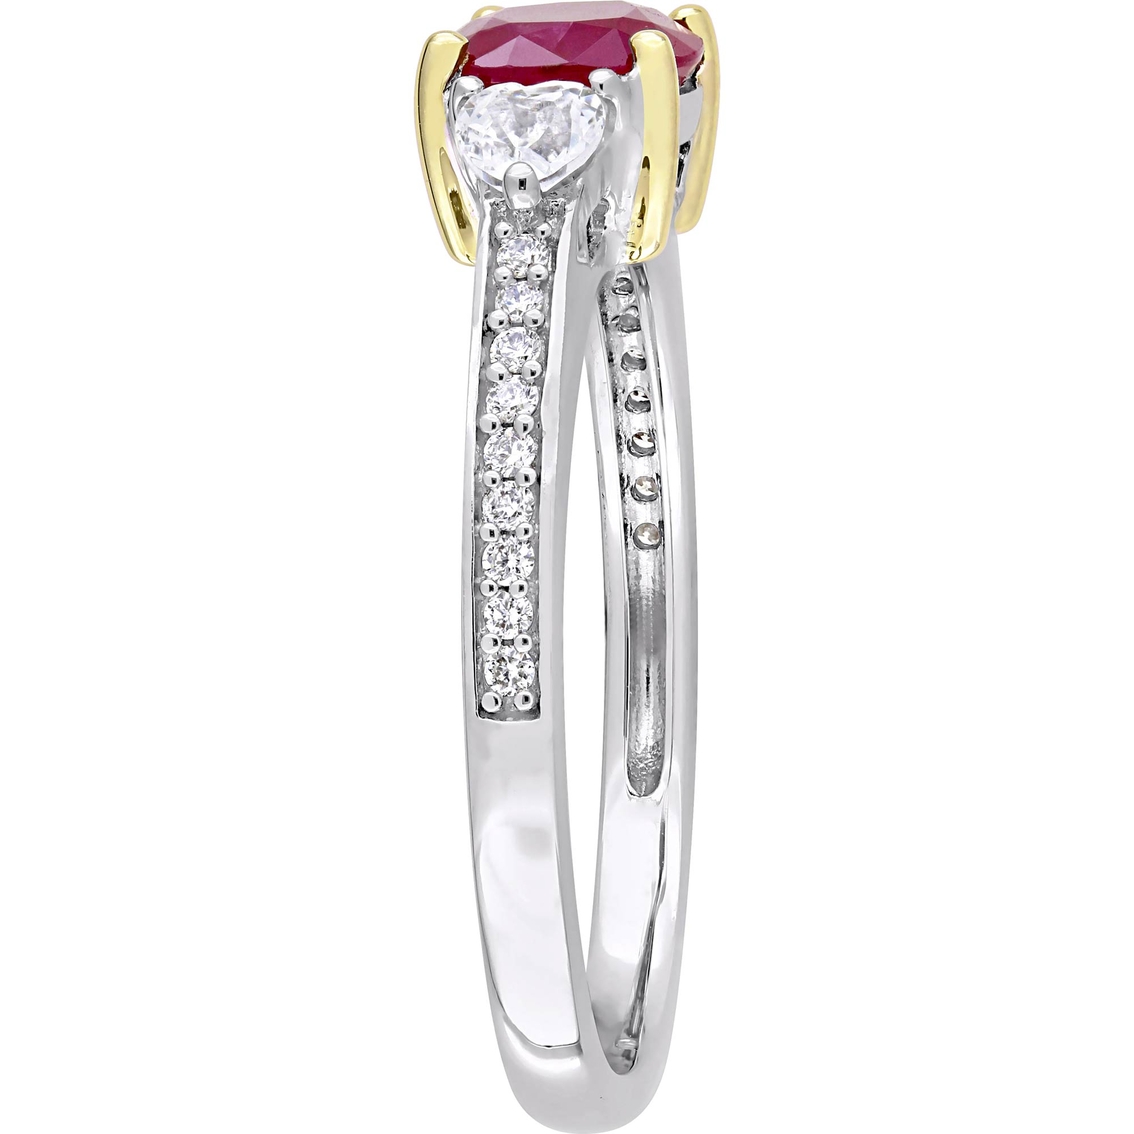 Sofia B. 14K Two-Tone Gold 3-Stone Ruby and White Sapphire 1/10 CTW Diamond Ring - Image 3 of 4